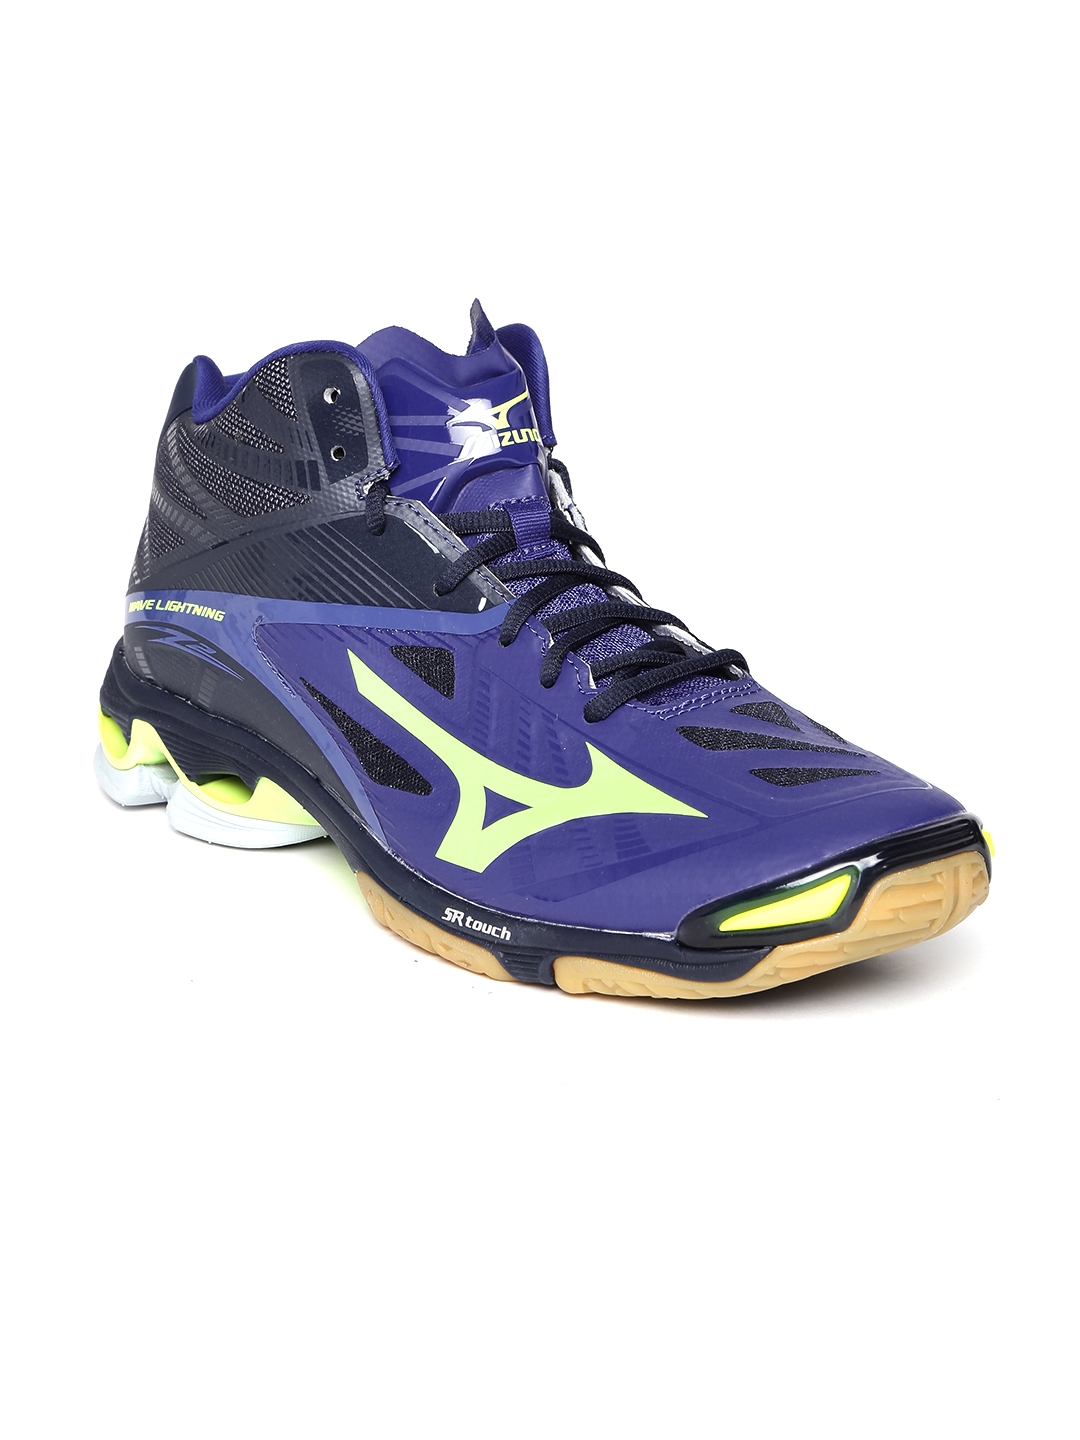 mizuno volleyball shoes prices in india